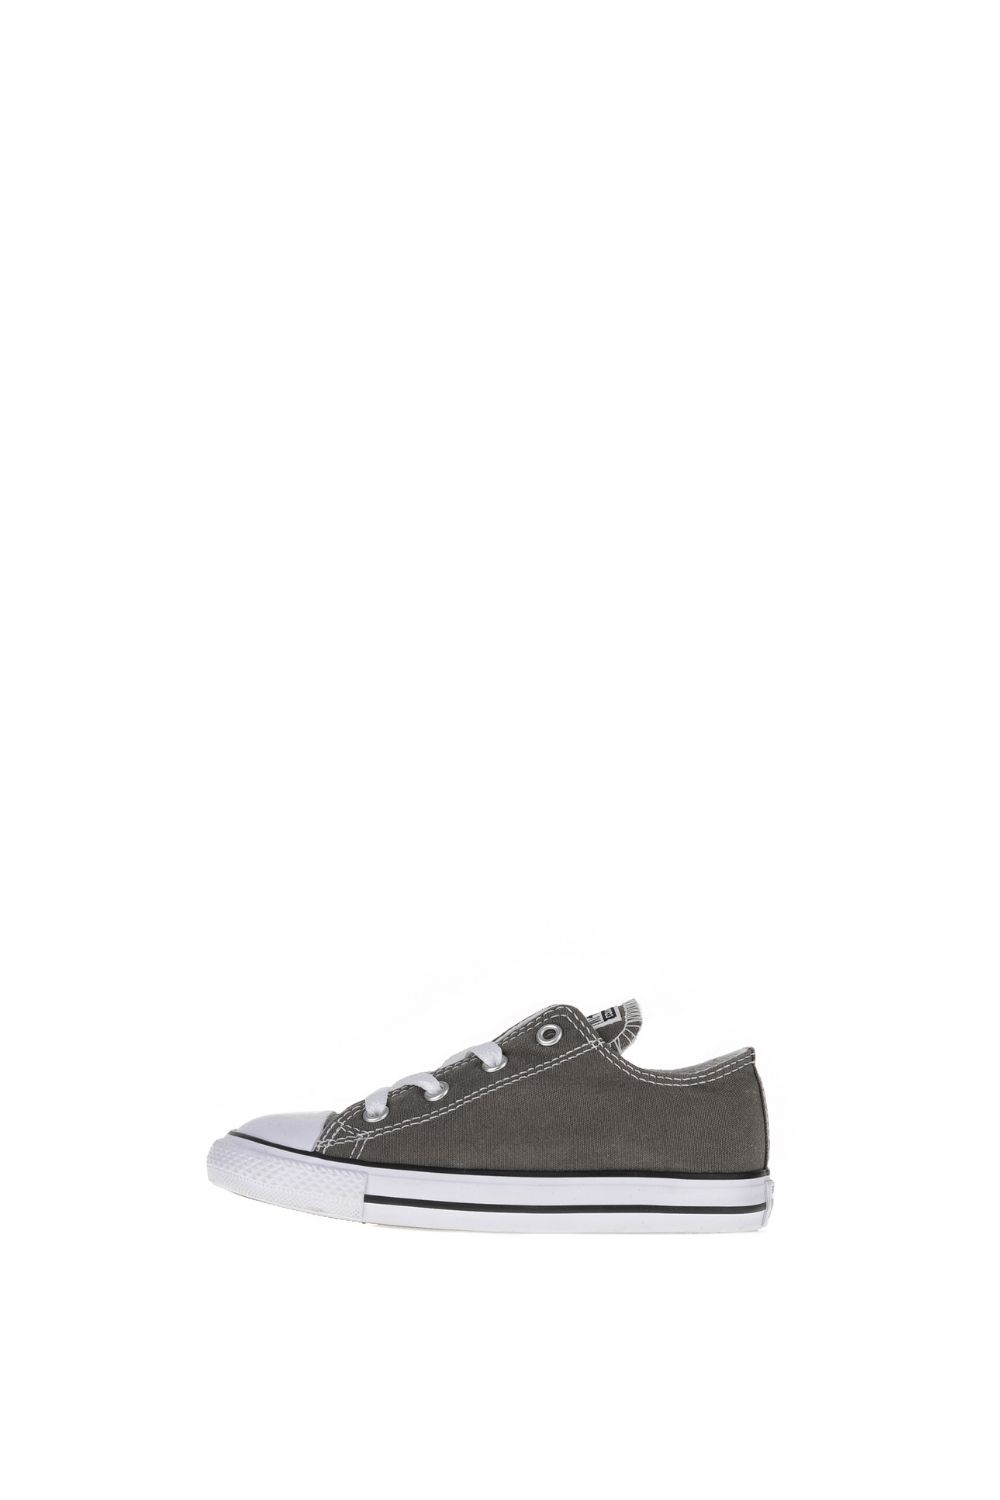 CONVERSE - Βρεφικά παπούτσια Chuck Taylor All Star Ox γκρι Παιδικά/Baby/Παπούτσια/Sneakers